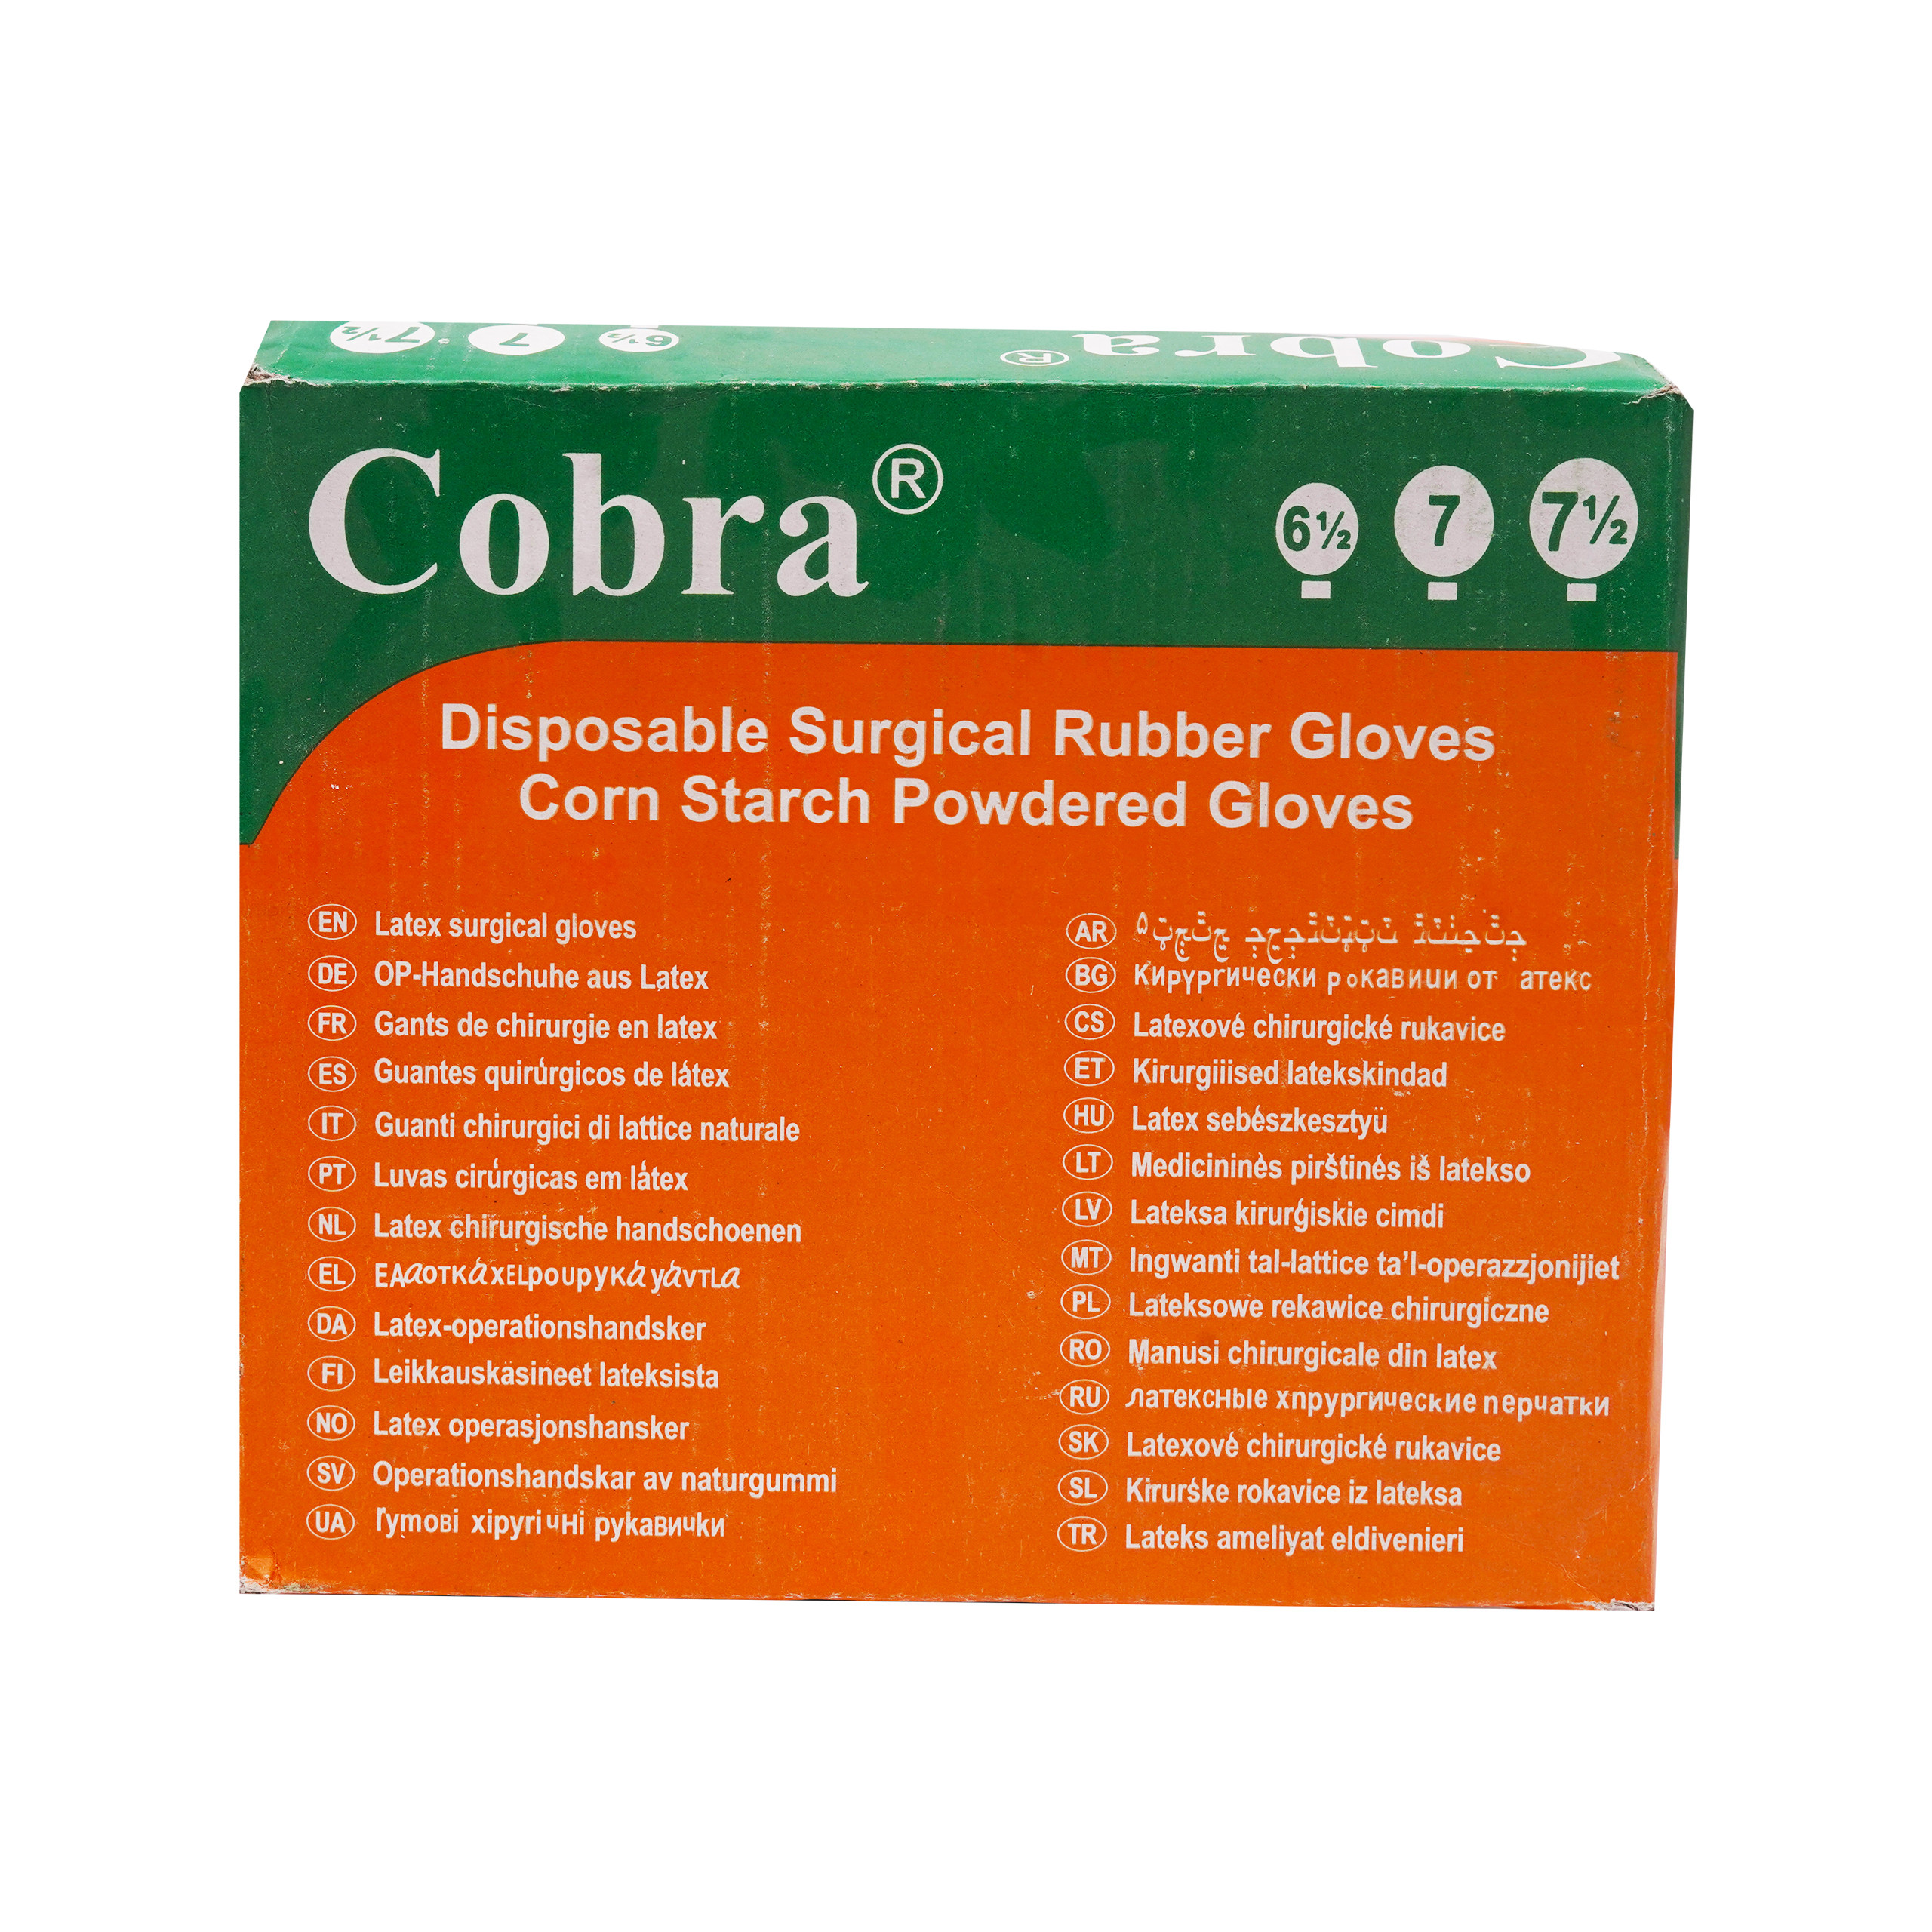 Cobra Disposable Surgical Rubber Gloves (Corn Starch Powdered Gloves) (50 Sterilized Pairs)